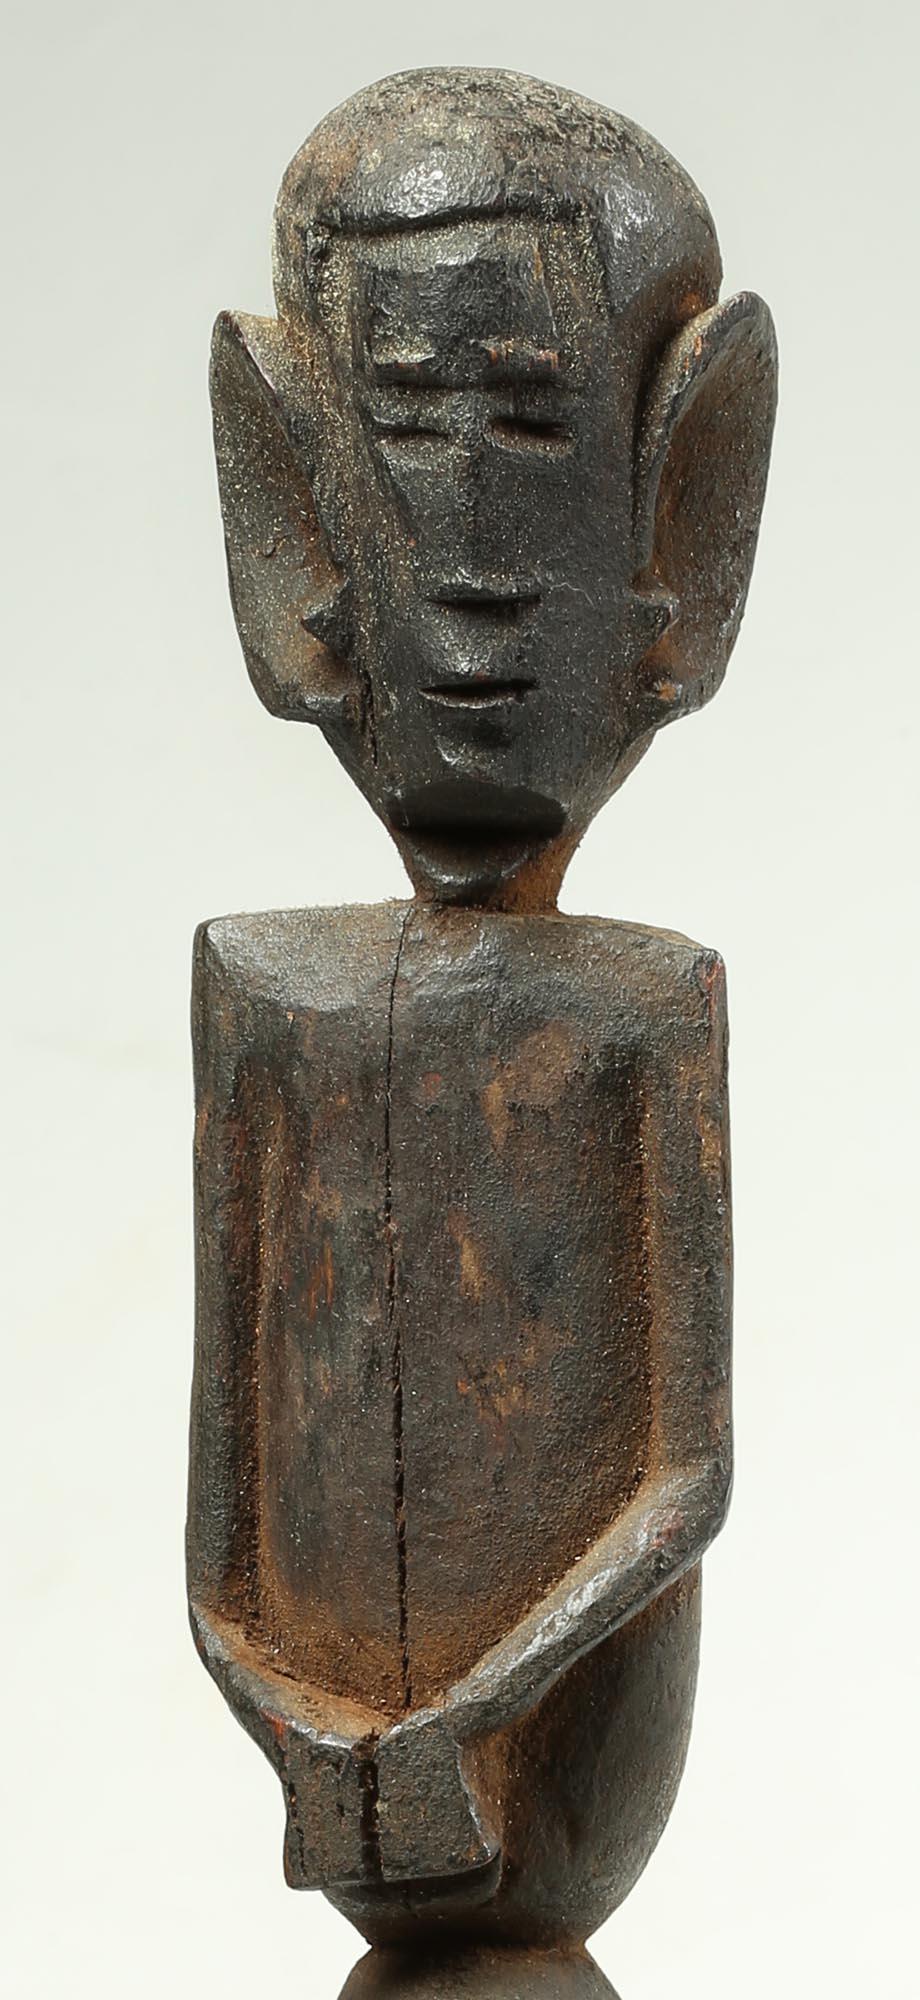 Zigua people, early double figure prestige or magical staff with large ears, one figure on top of other, early 20th century, Tanzania. A striking dance or prestige staff with haunting figures and exaggerated features. 18 3/4